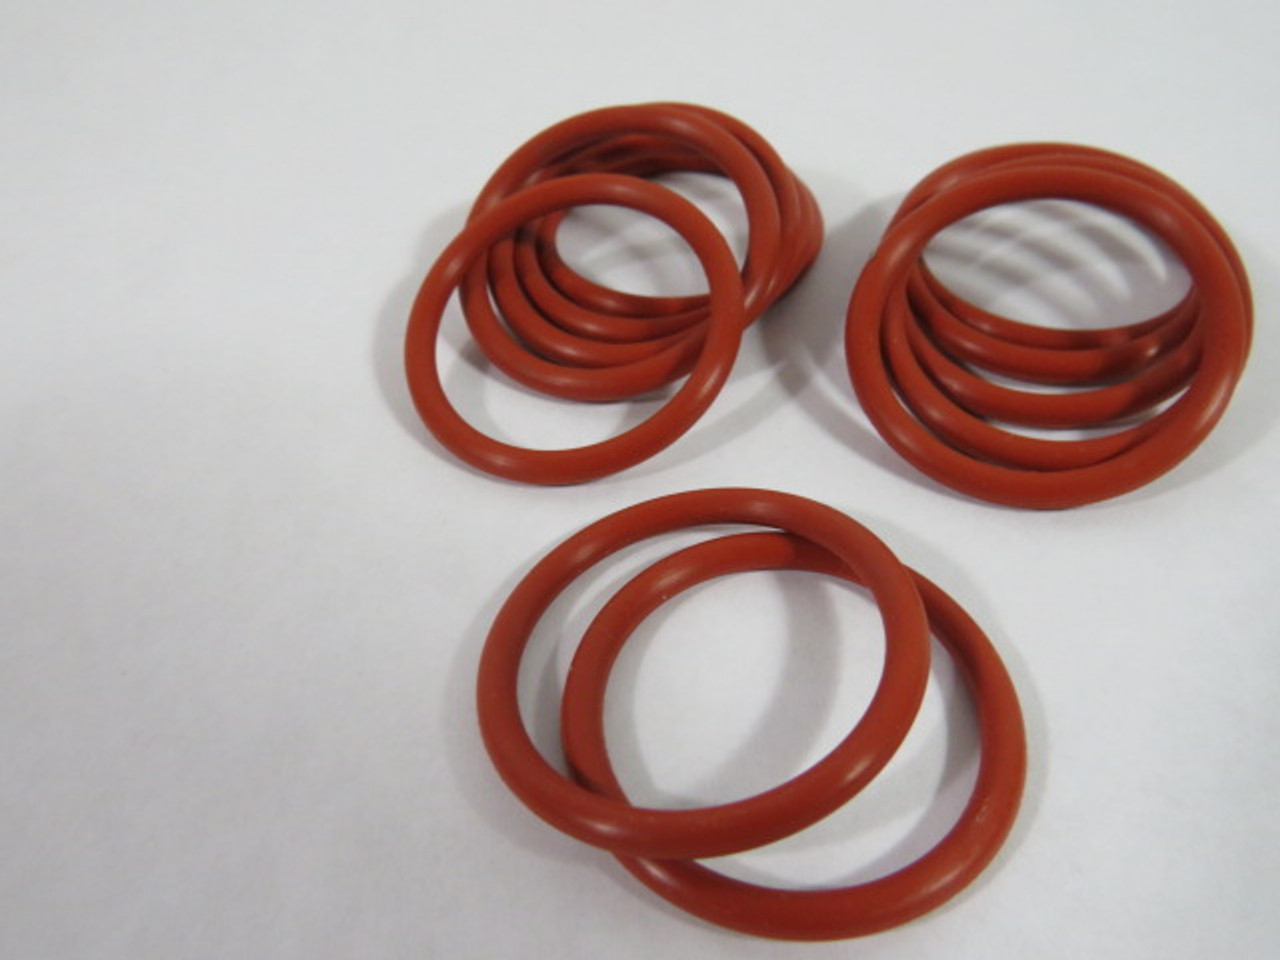 Able Seal 2-218S700-FDA Silicon O-Ring 31.34mm ID 38.40mm OD Lot of 12 USED